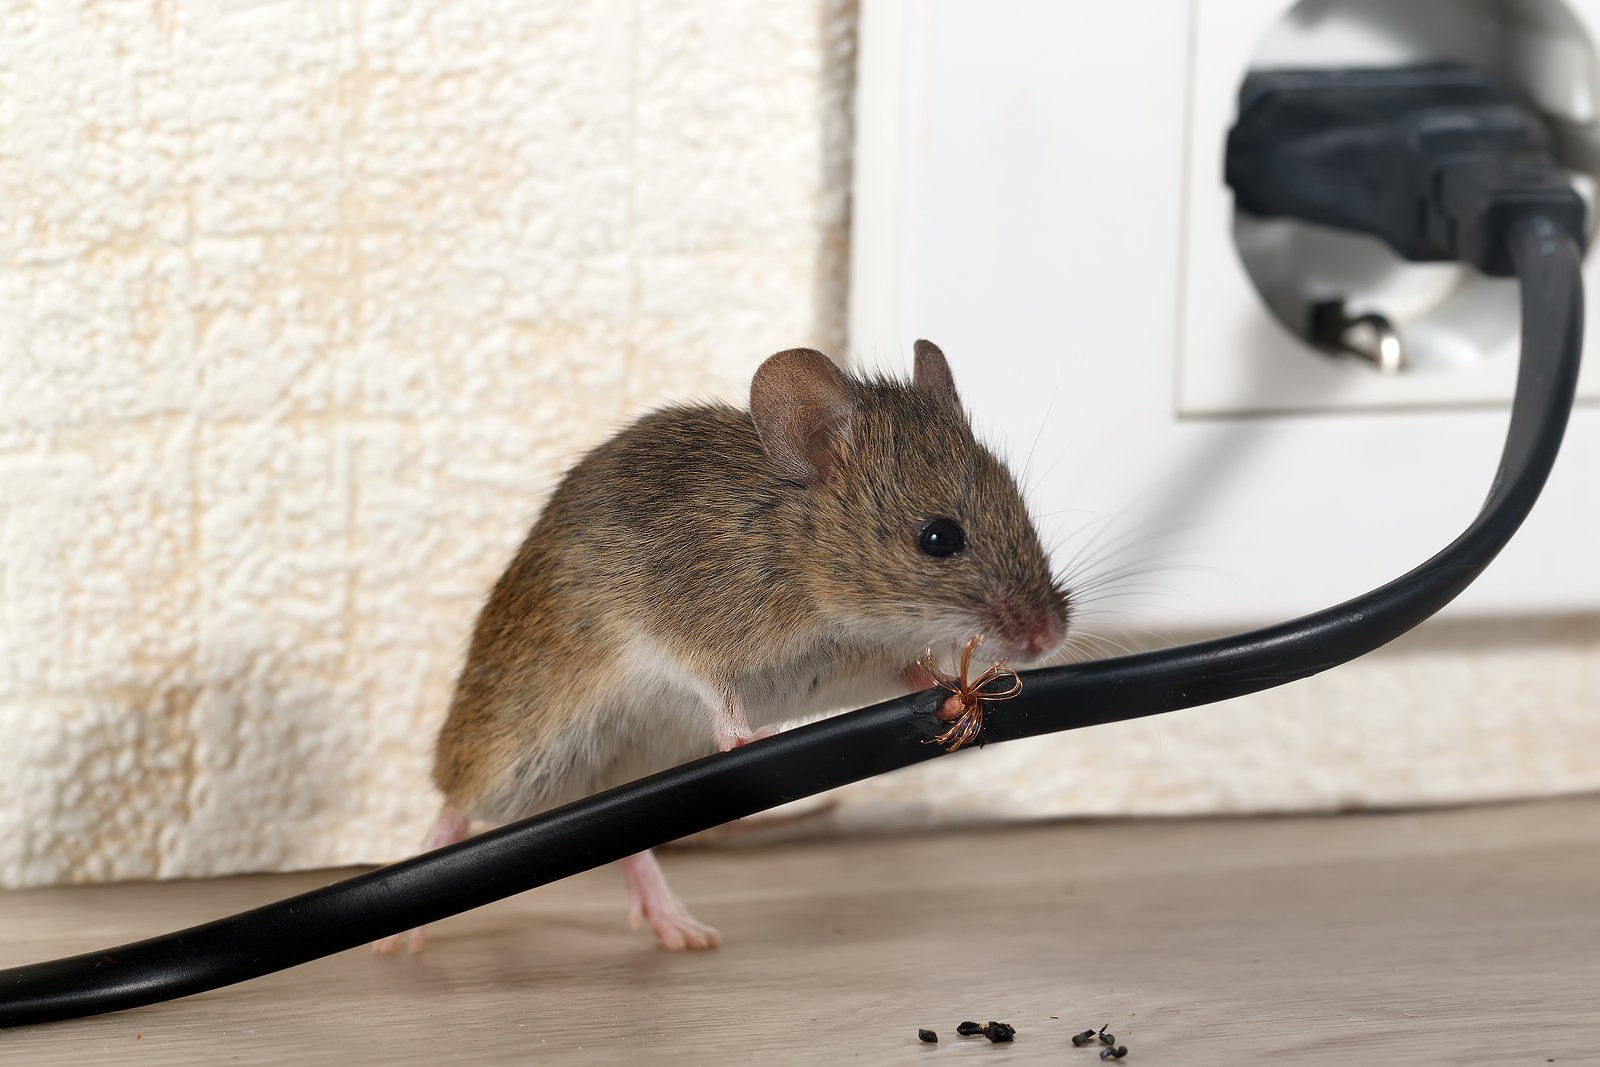 Rodent Control Services in Shawnee, OK